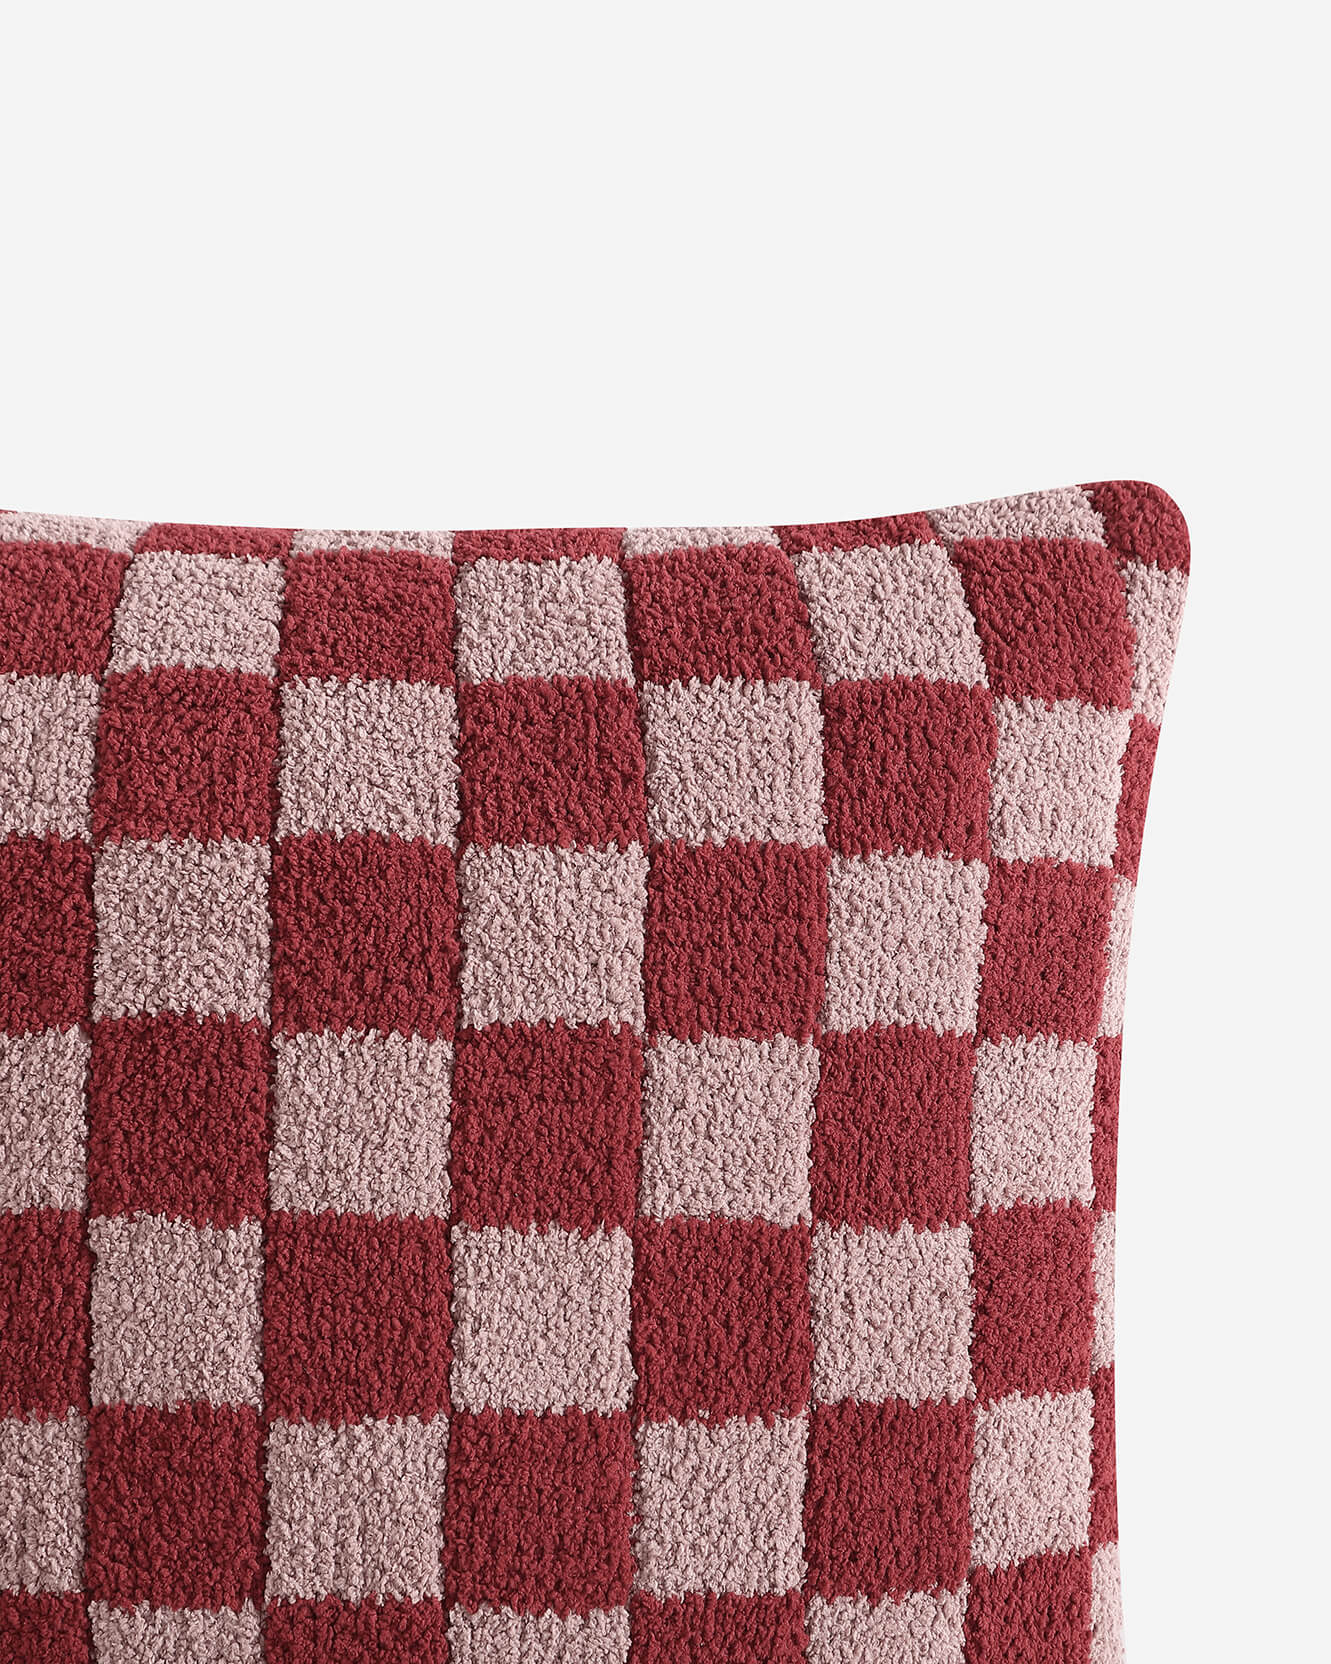 Close-up of the checkered pattern on the soft microfiber pillow cover.